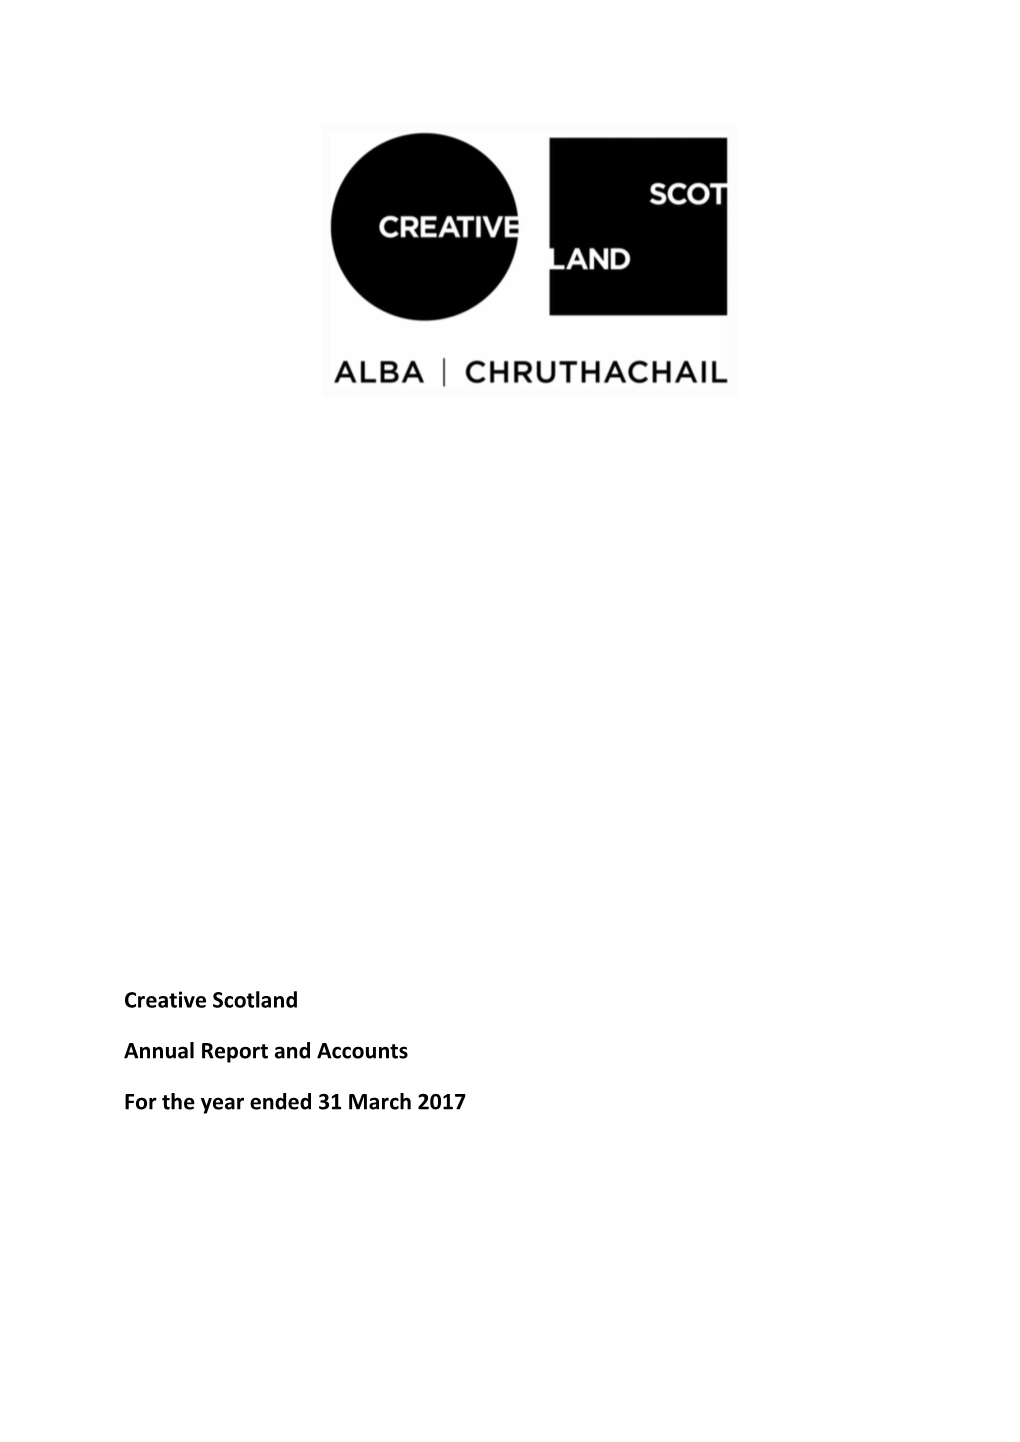 Creative Scotland Annual Report and Accounts for the Year Ended 31